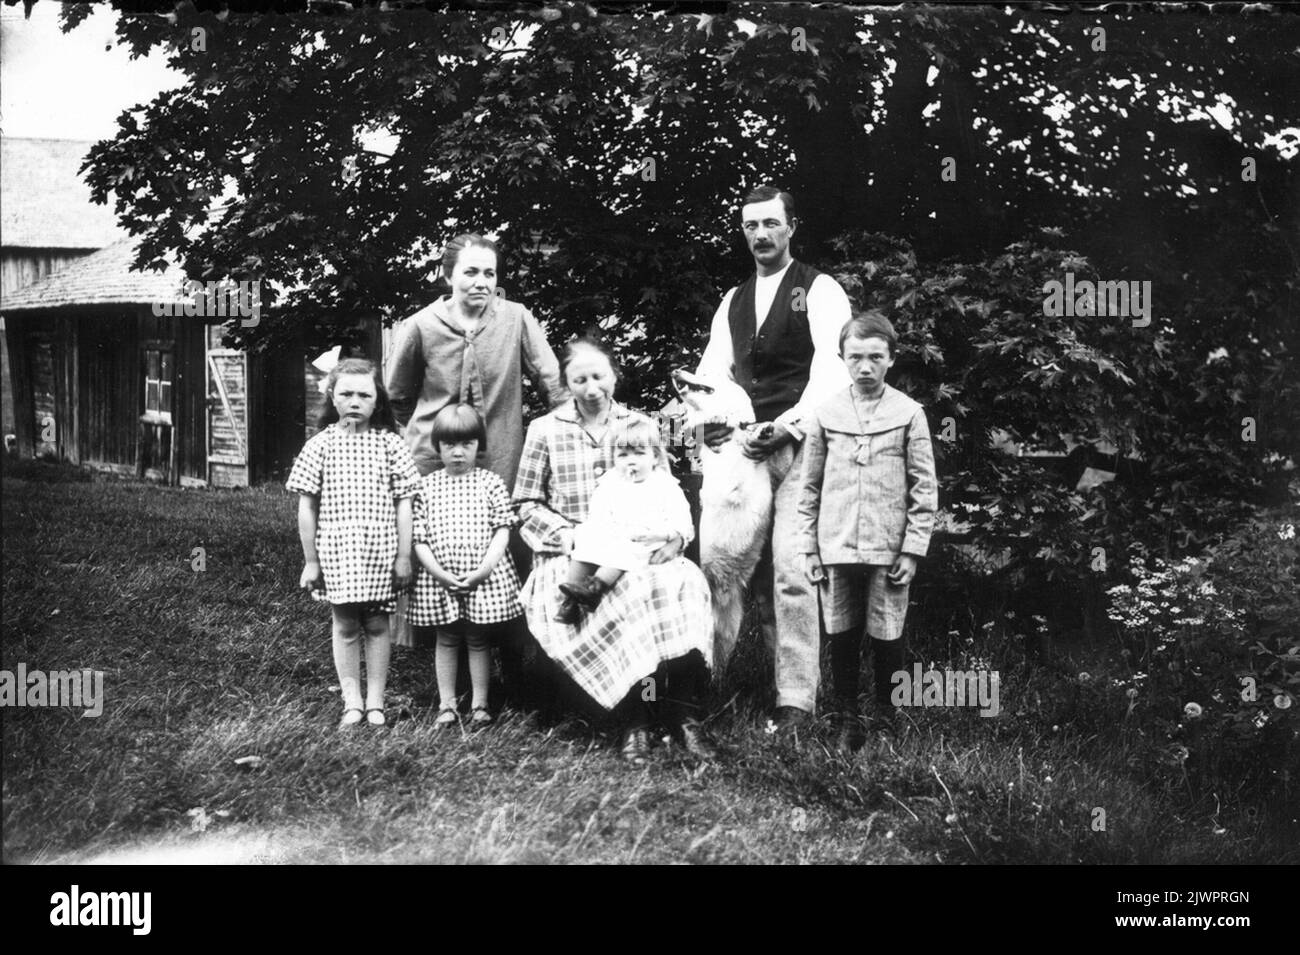 The motif from 'Anders-Jöns'. The Gustaf Lundberg family (Västerbo), Vivi, Ruth, Augusta with Karin, Gustaf, Gunnar and Augusta's sister Elna Andersson. Motivet från 'Anders-Jöns'. Familjen Gustaf Lundberg (Västerbo), Vivi, Ruth, Augusta med Karin, Gustaf, Gunnar samt Augustas syster Elna Andersson. Stock Photo